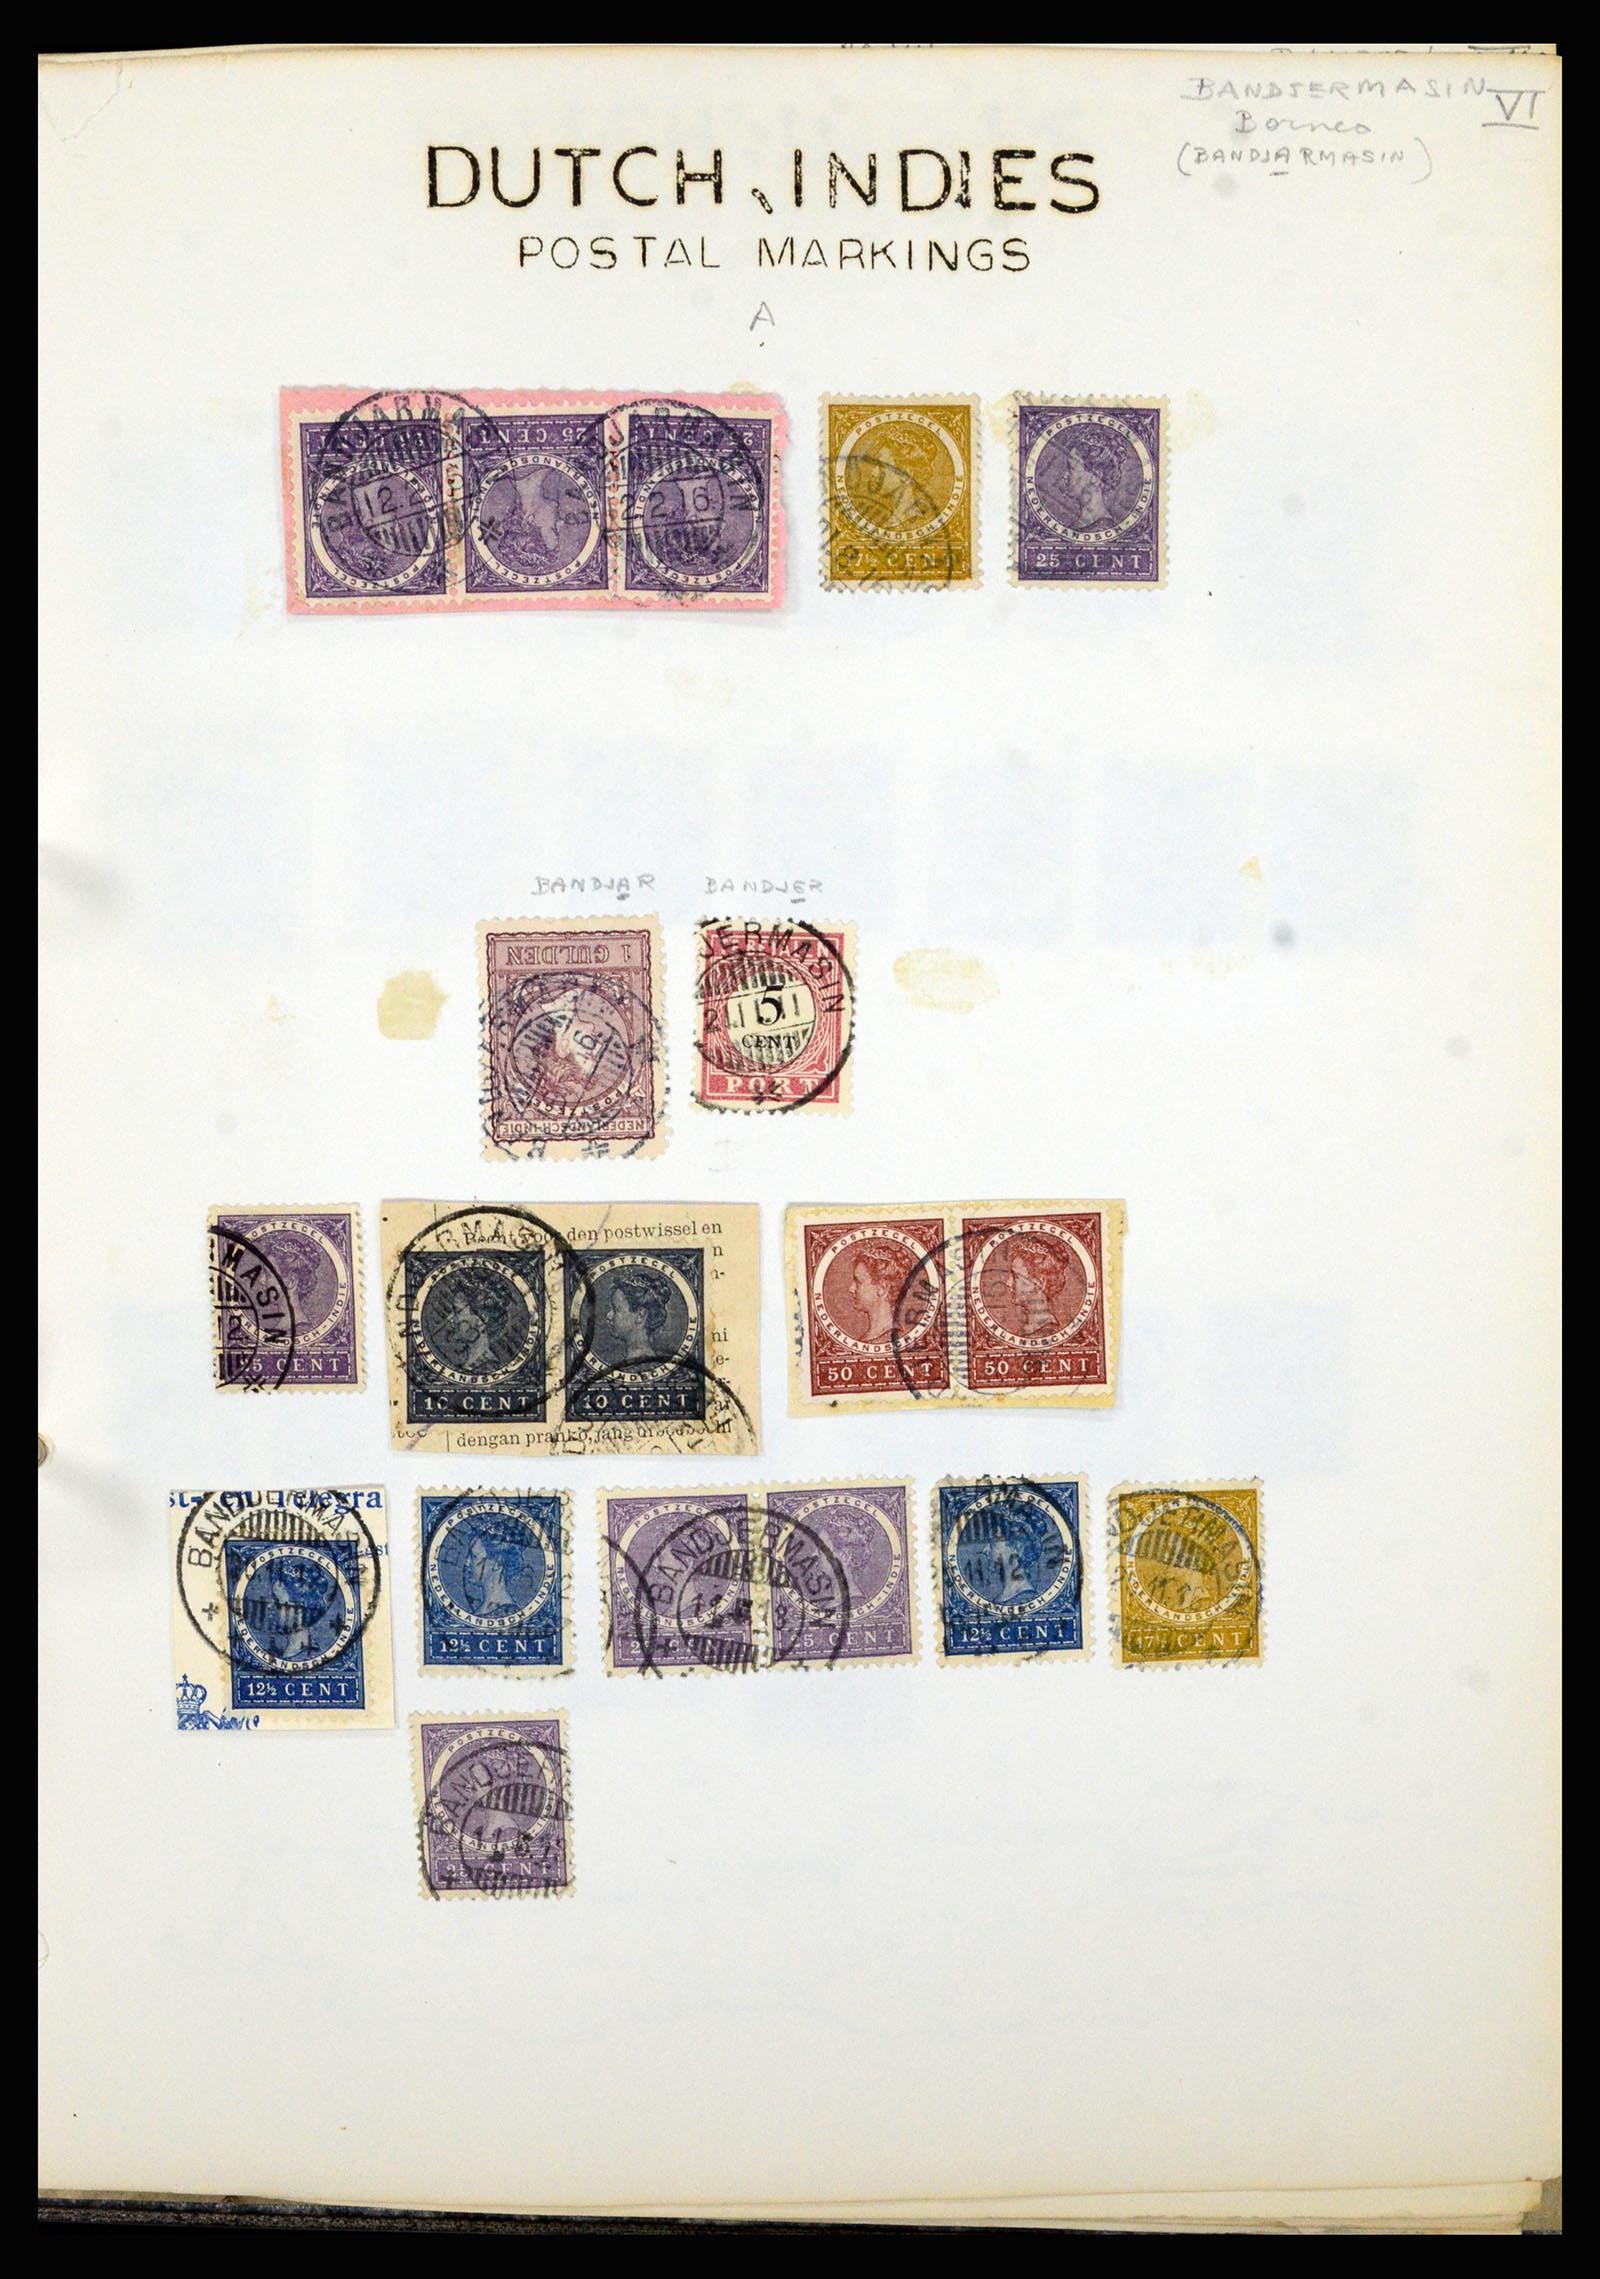 36841 008 - Stamp collection 36841 Dutch east Indies short bar cancels.